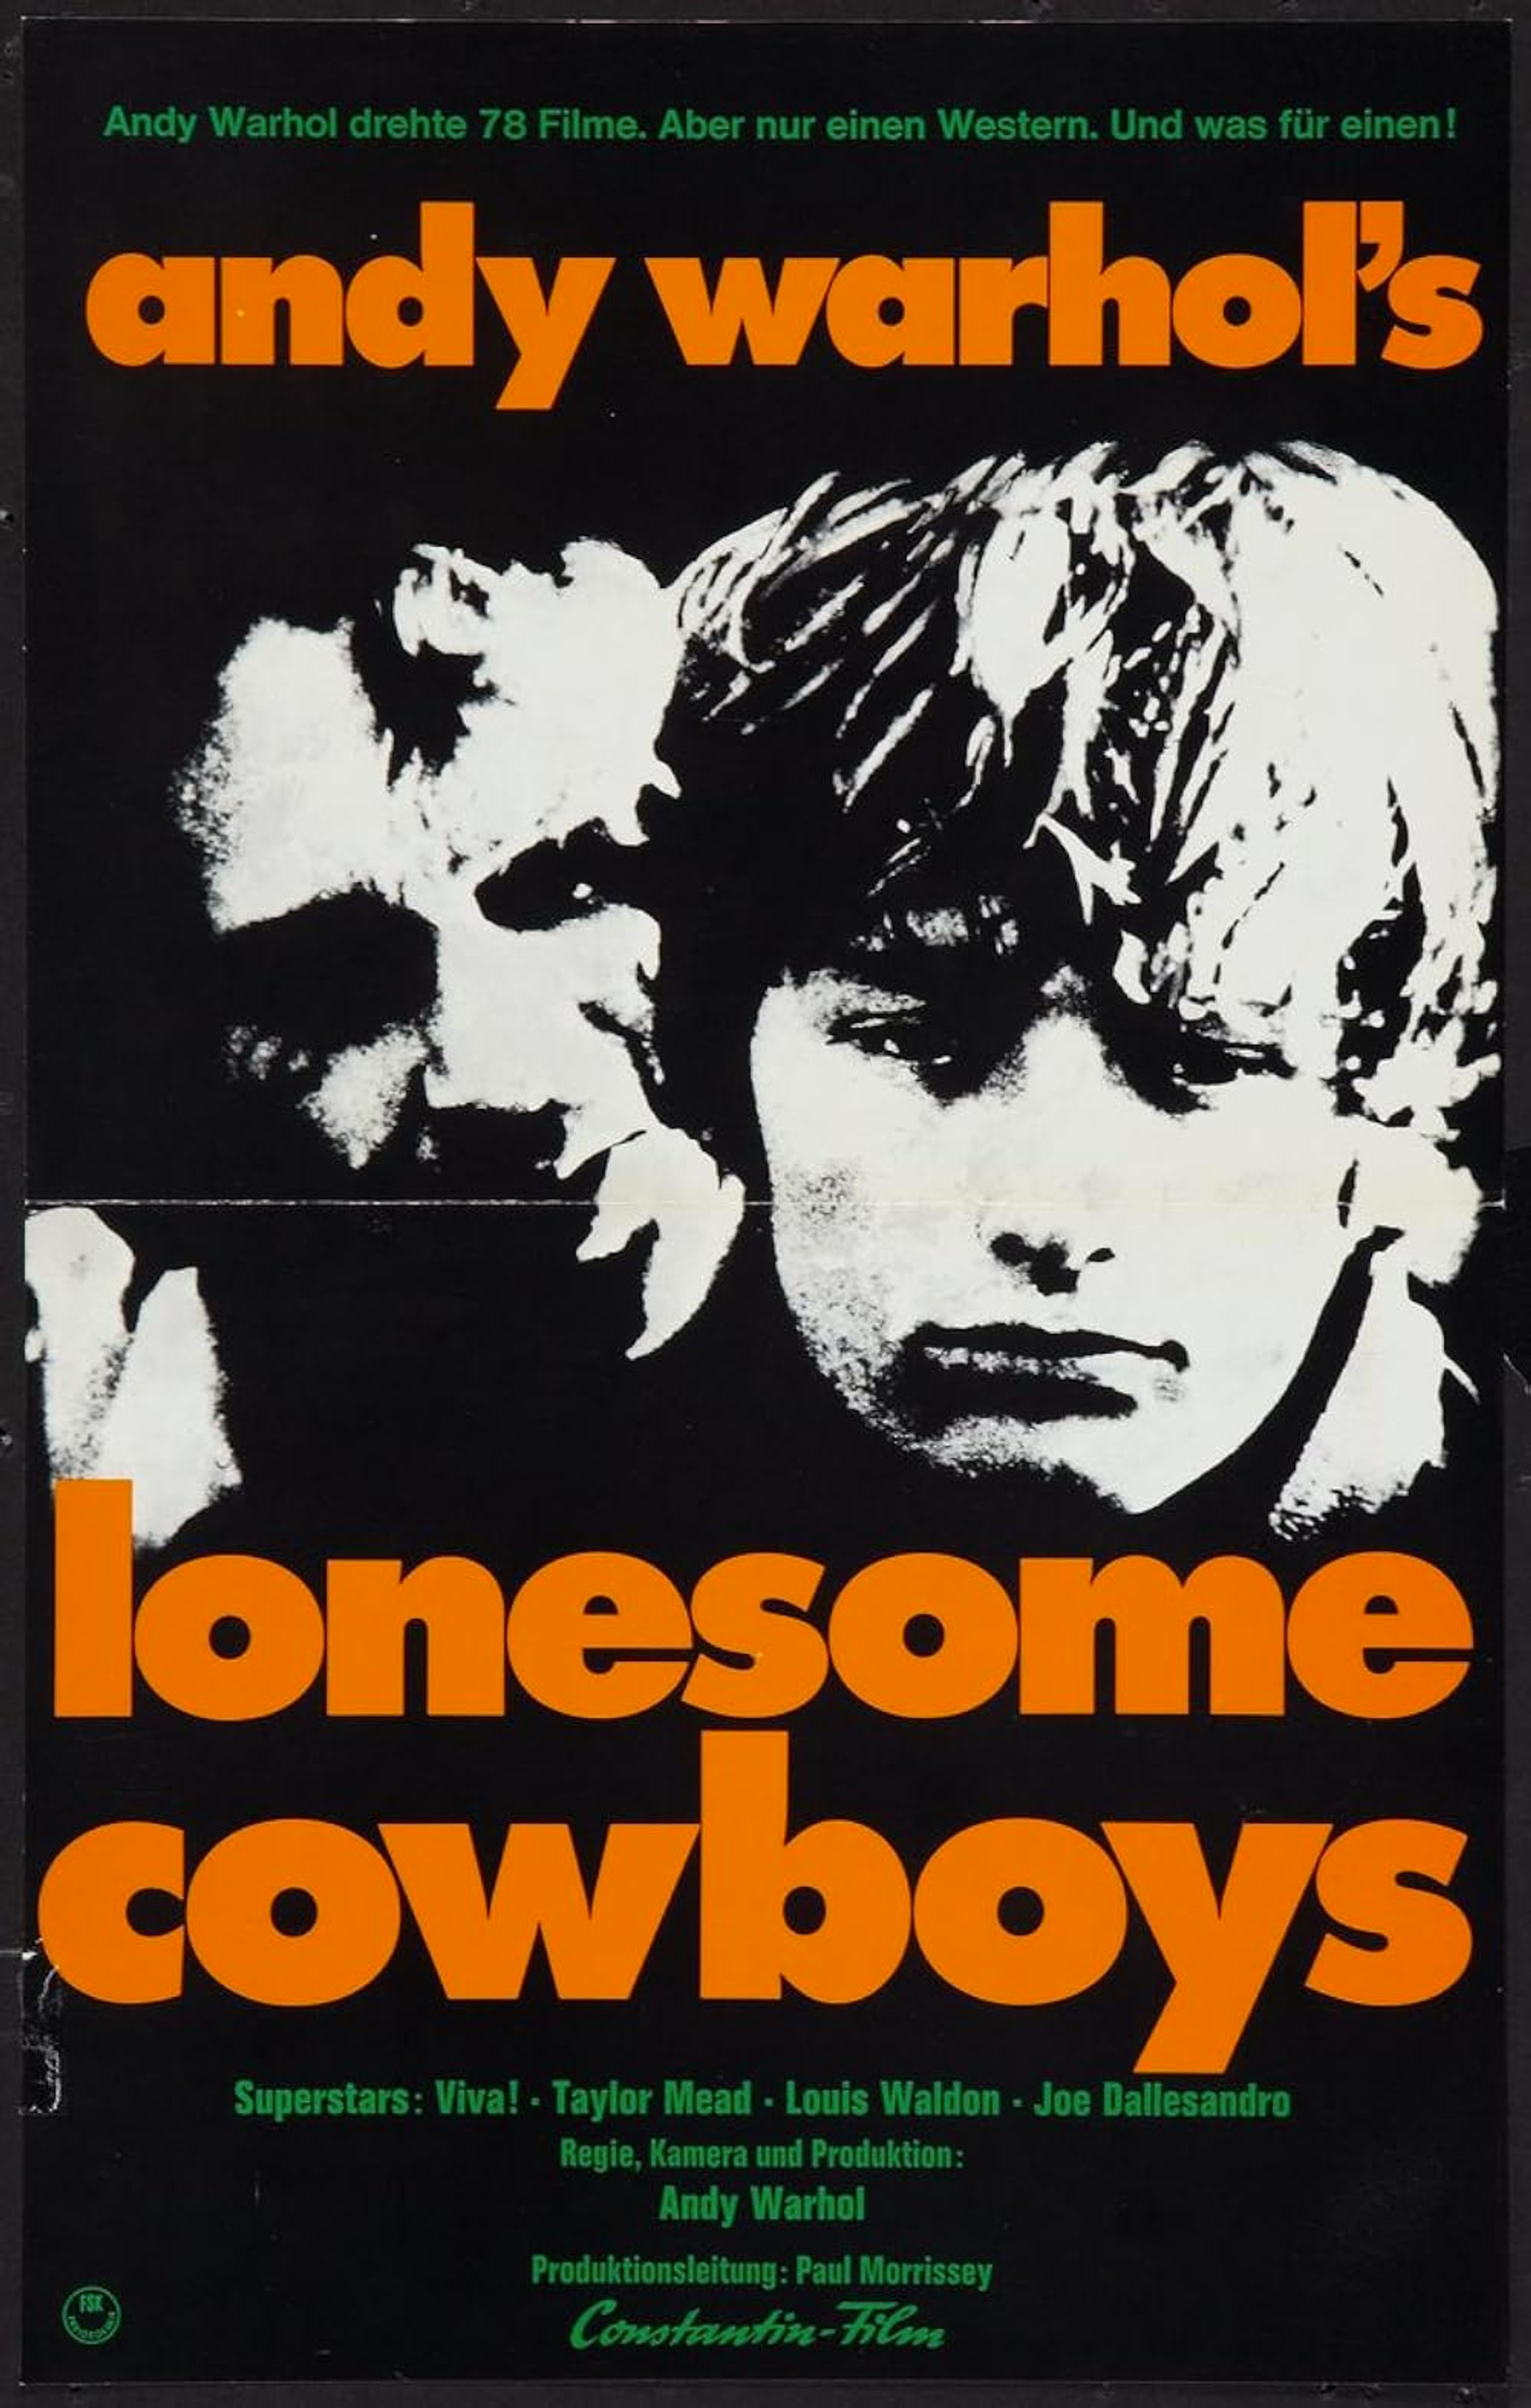 The poser for Andy Warhol's Lonesome Cowboys. It is a black and white image of two men gazing at the viewer. Warhol's name and the movie title are shown in bright orange.